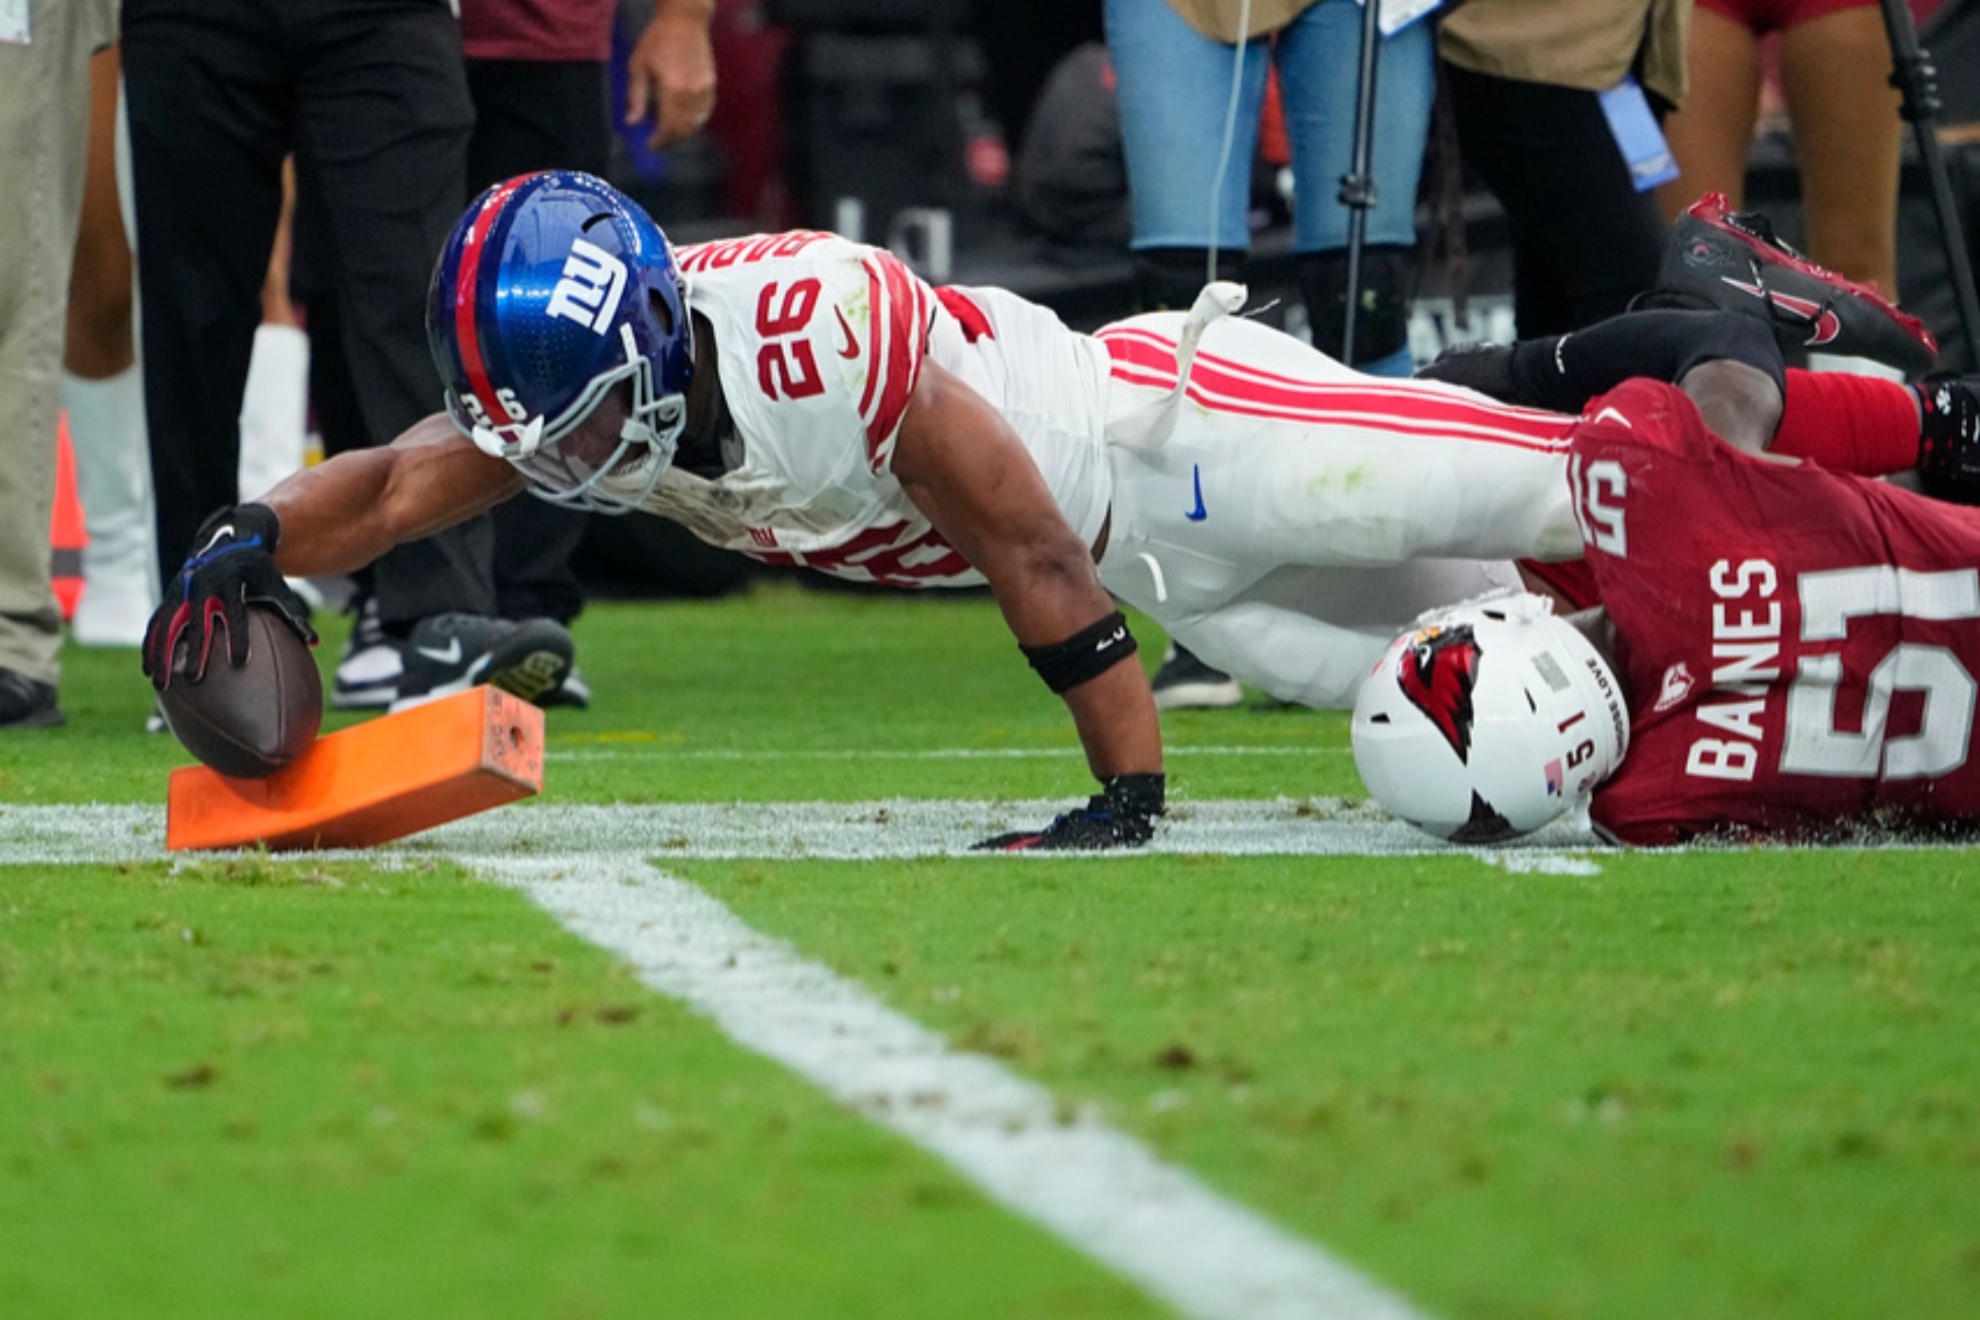 Saquon Barkley got injured during Week 2's game against the Cardinals